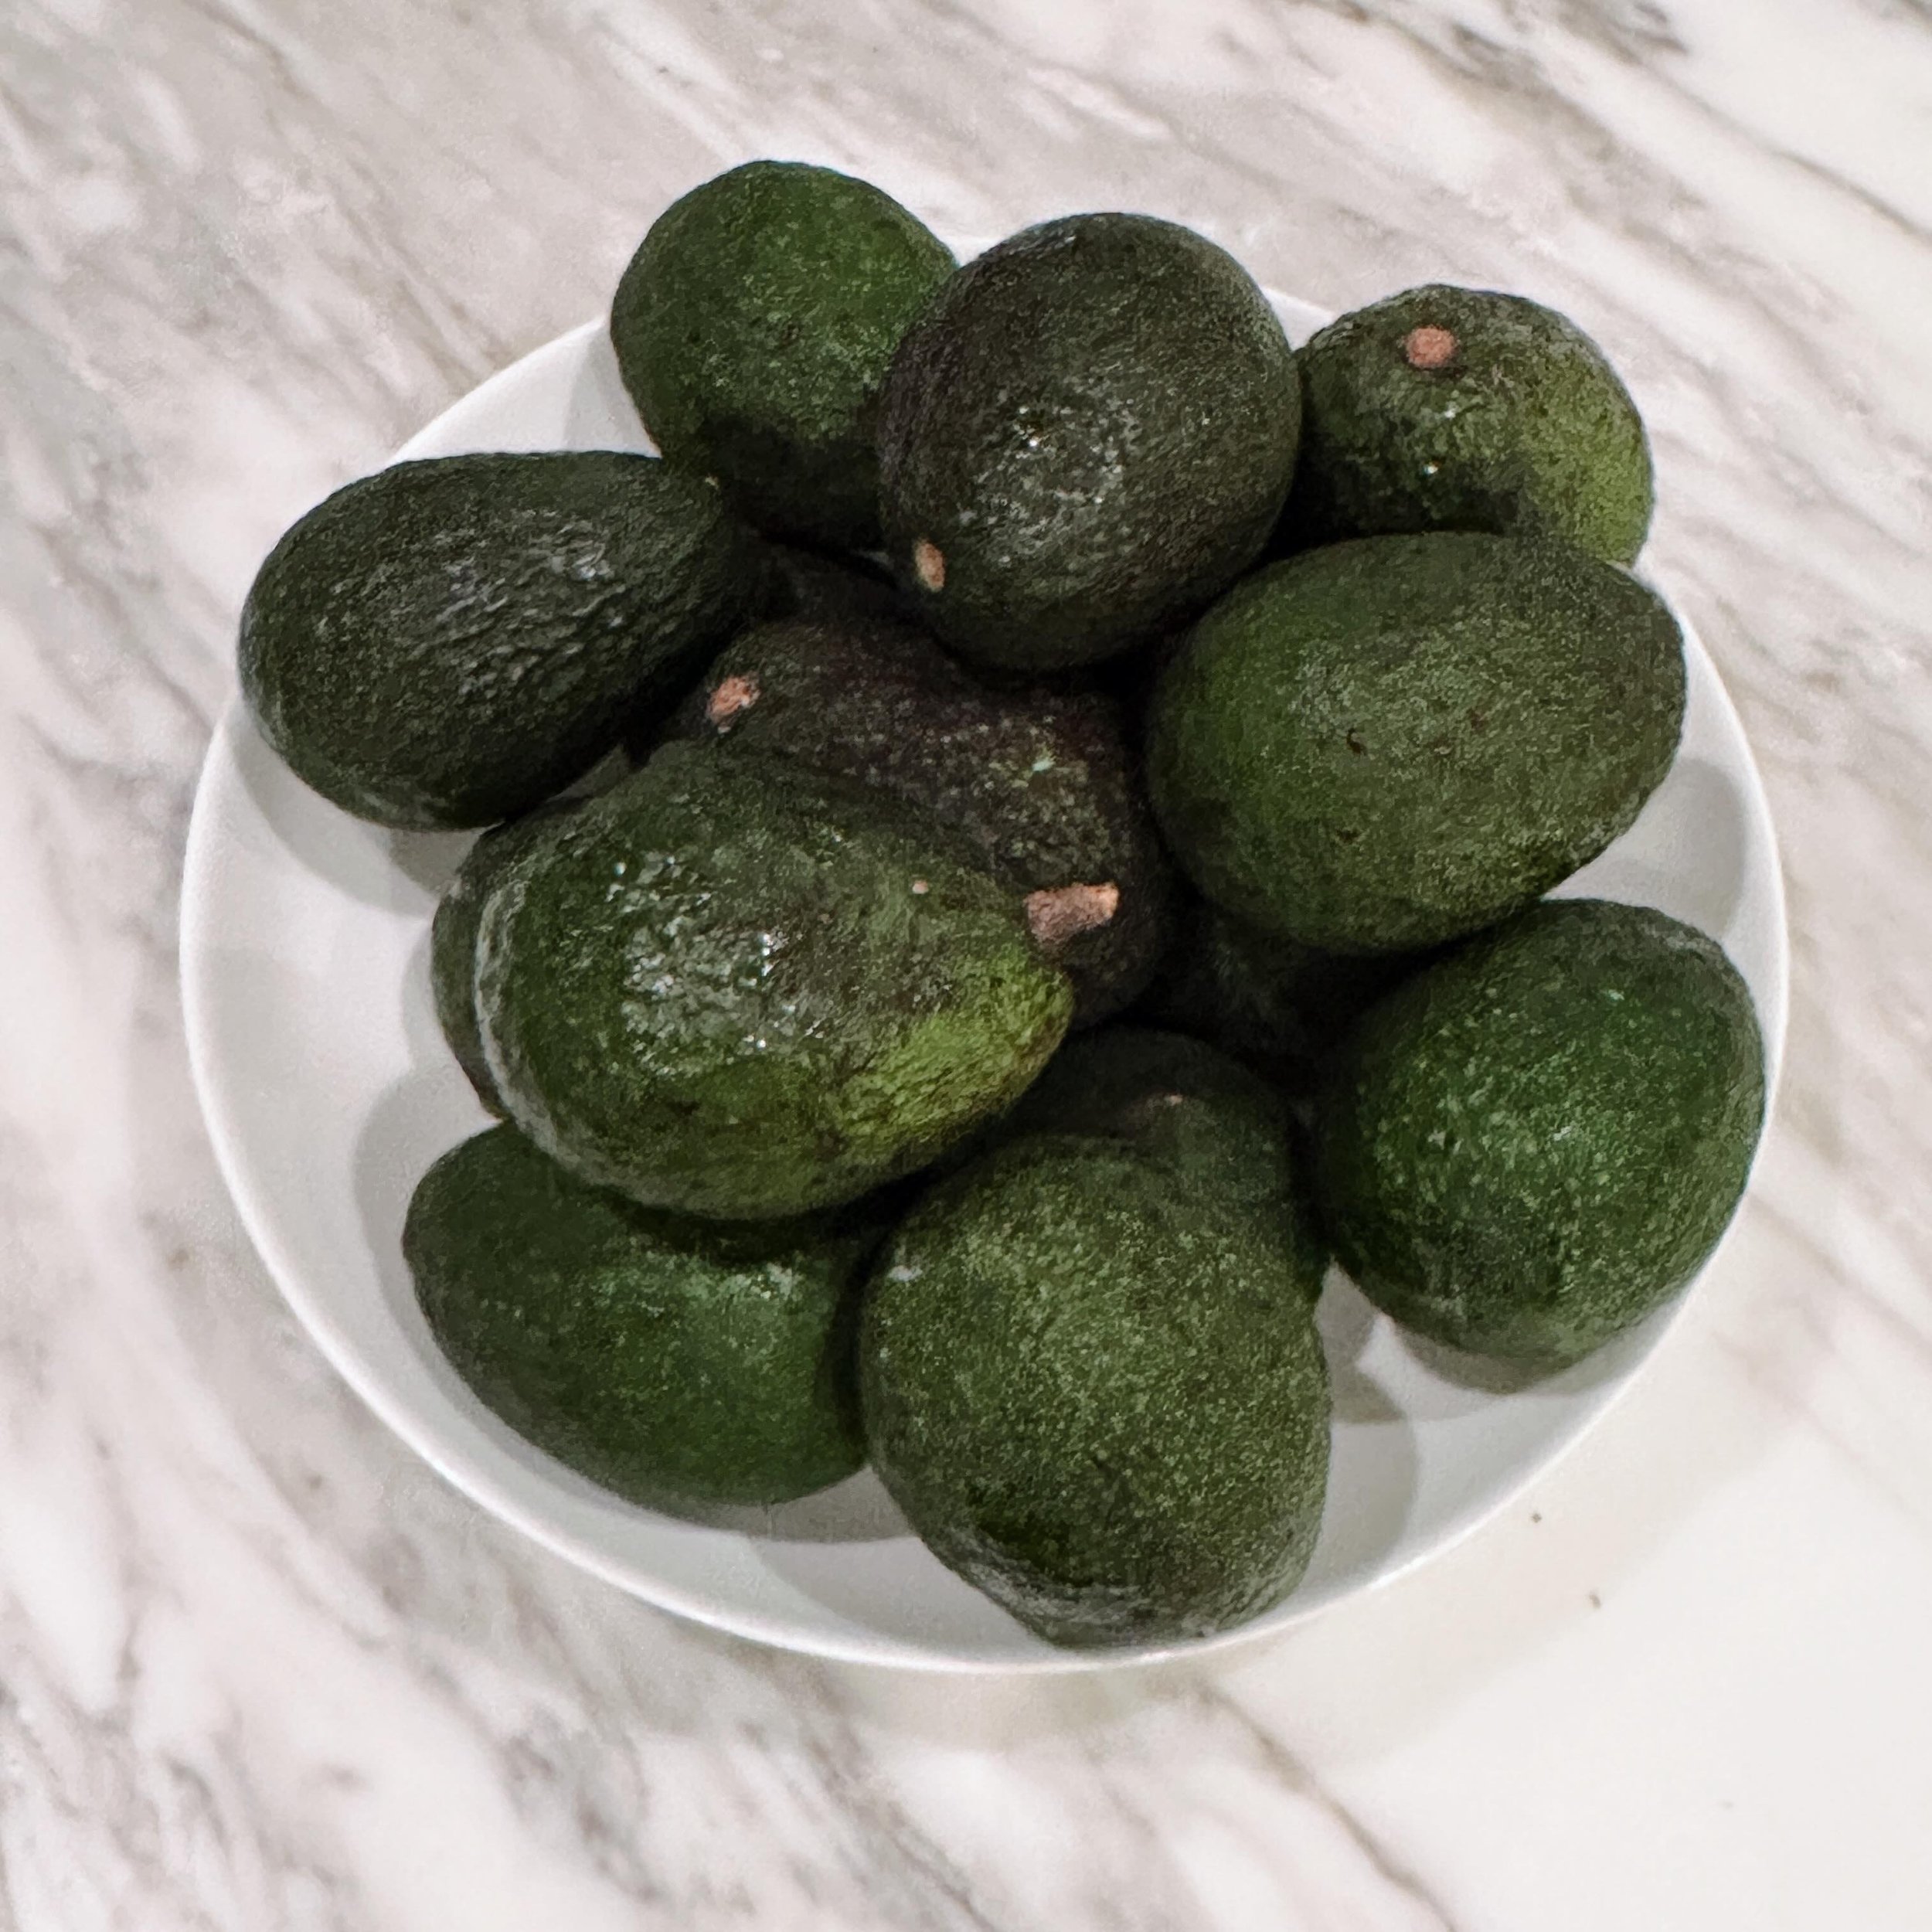 Indulge in the avocado experience! Elevate meals with nature&rsquo;s brain food. Blend them into your morning smoothie, pop them in salads, or savor them with steamed veggies and wild fish. Need a quick fix? Drizzle with olive oil and sprinkle with g